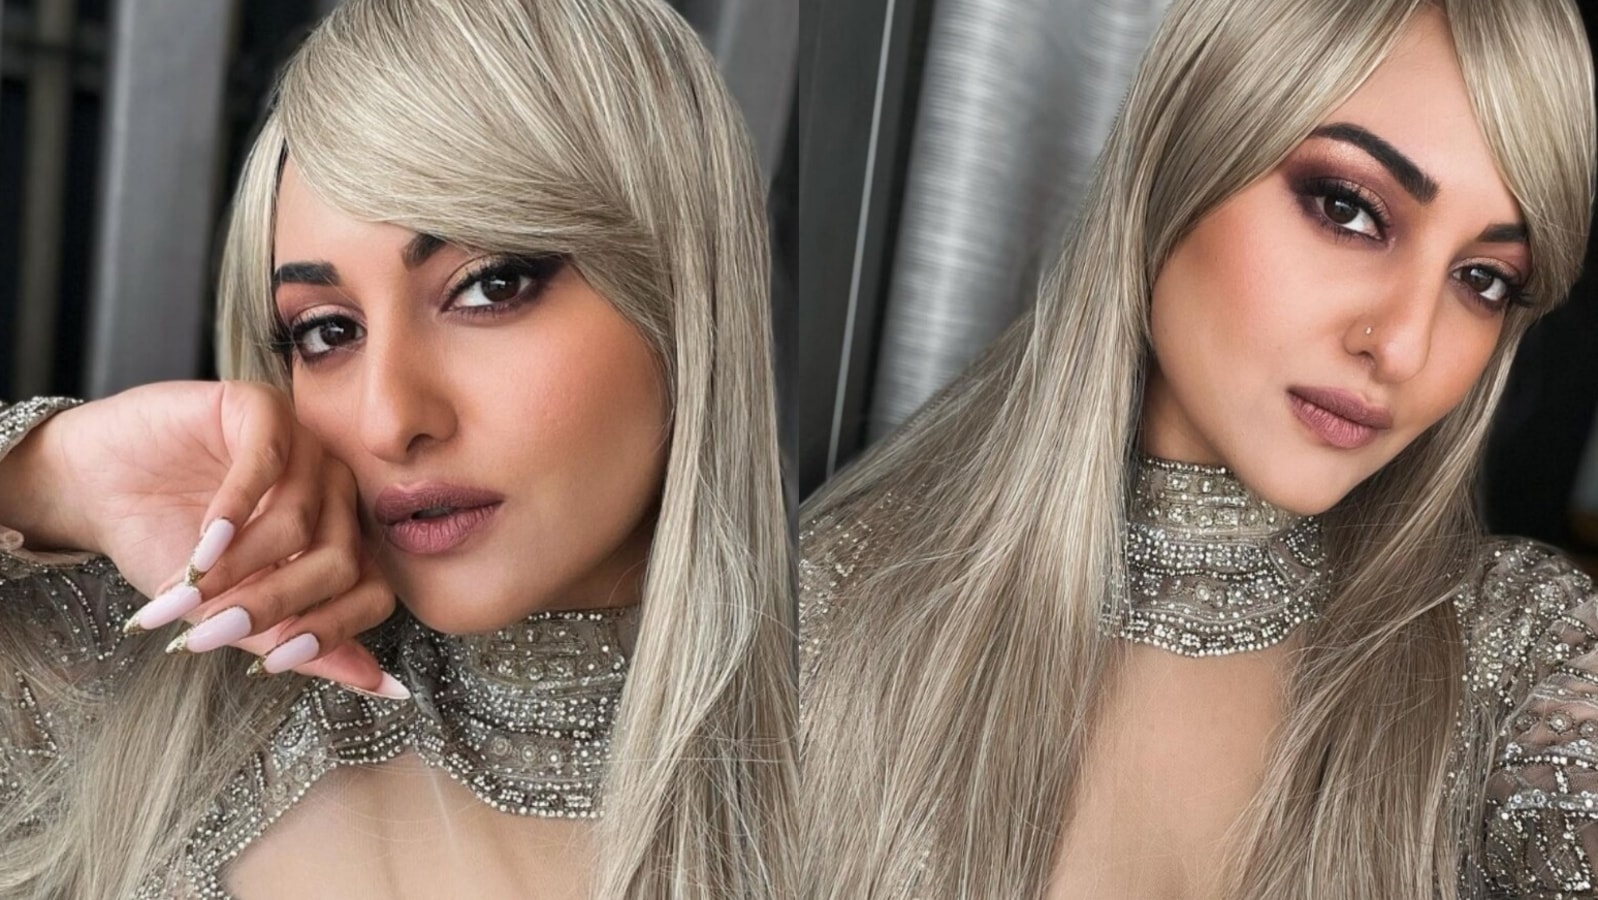 Sonakshi Shinha Se Xxx Com - Sonakshi Sinha goes blonde in new pictures, Huma Qureshi calls them 'scary'  | Bollywood - Hindustan Times